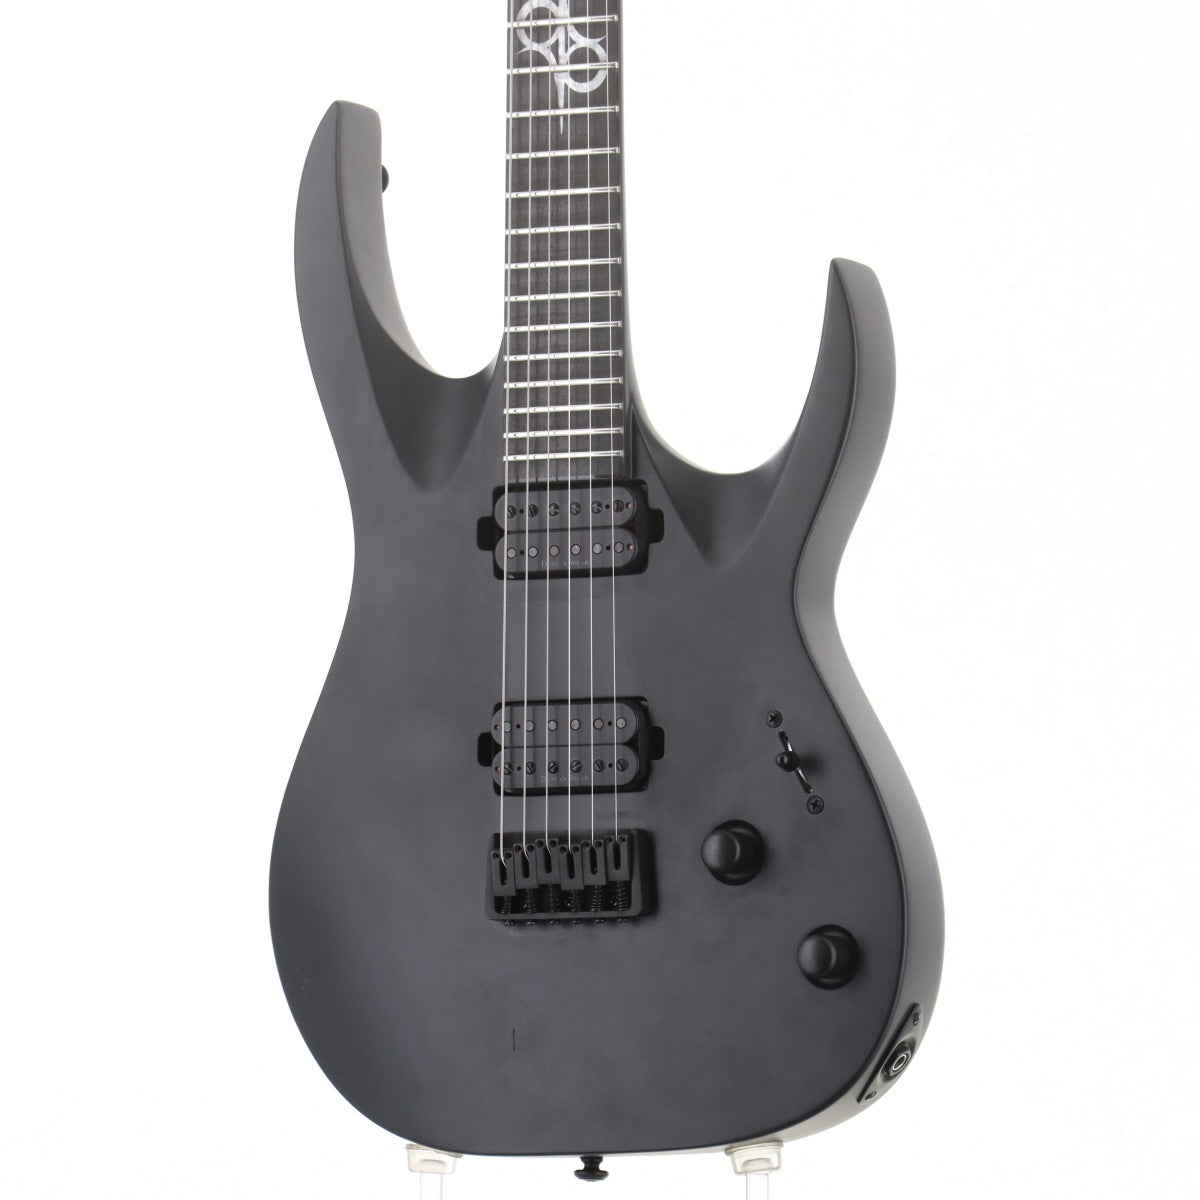 [SN IW23010097] USED SOLAR GUITARS / Type-A A2.6C Carbon Black Matte [08]